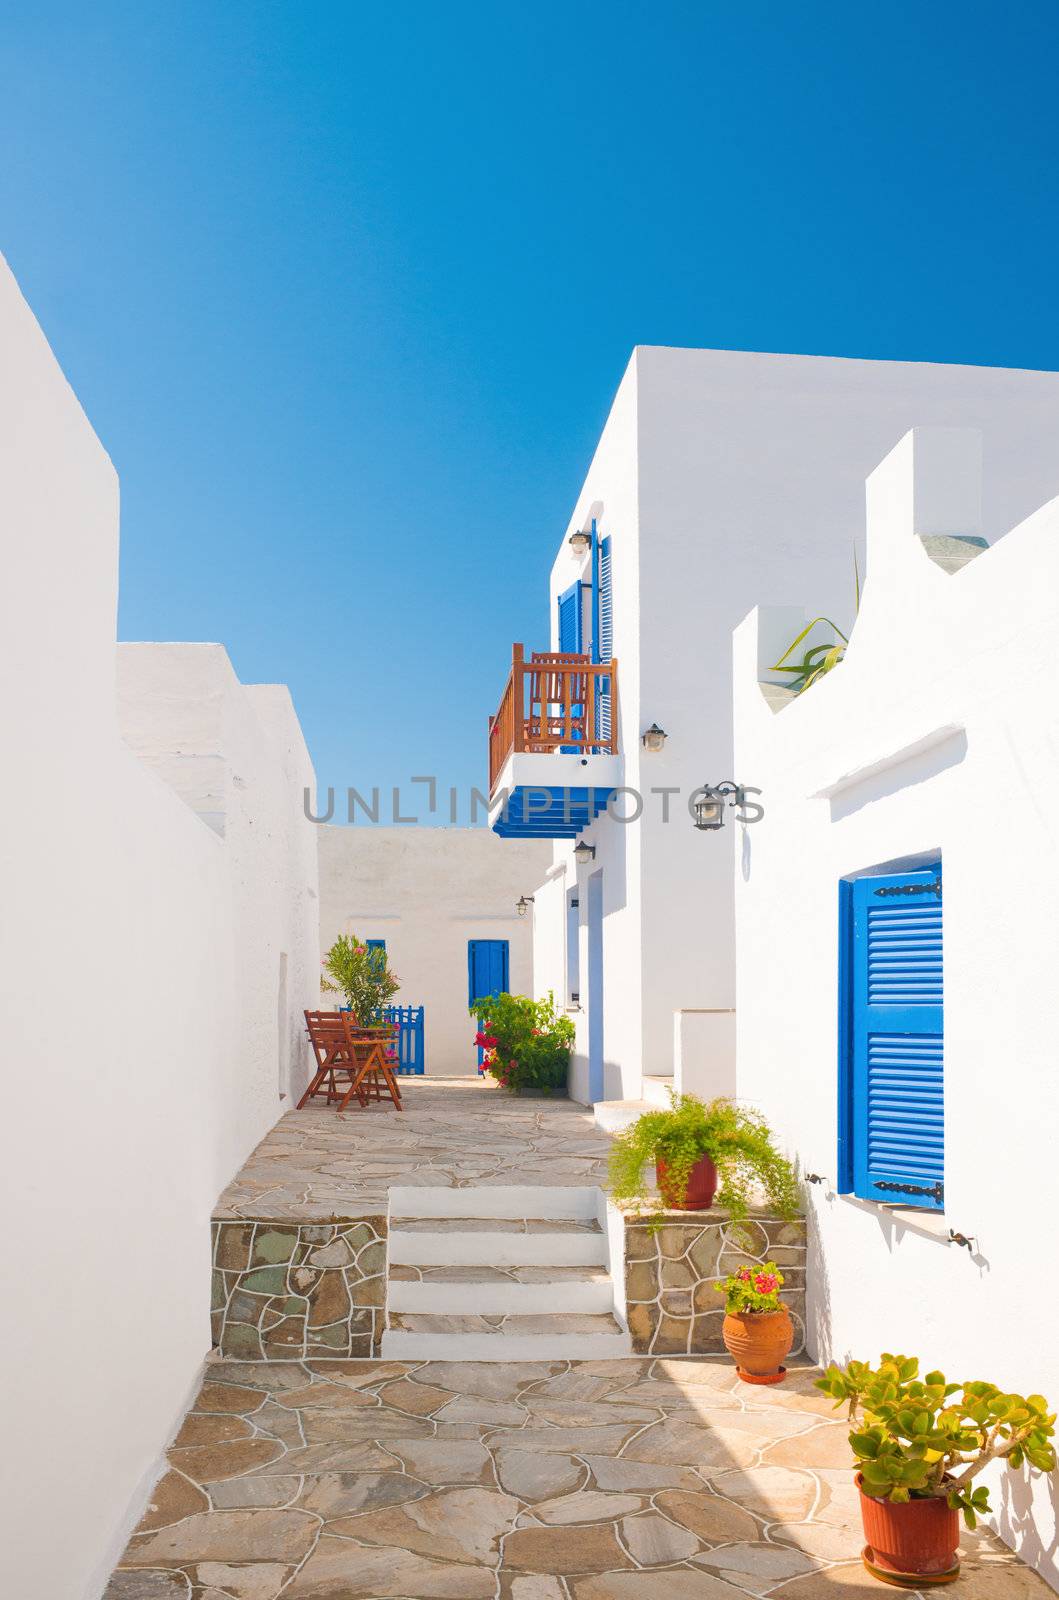 Colorful alleyway from a town on the island of Sifnos, Greece